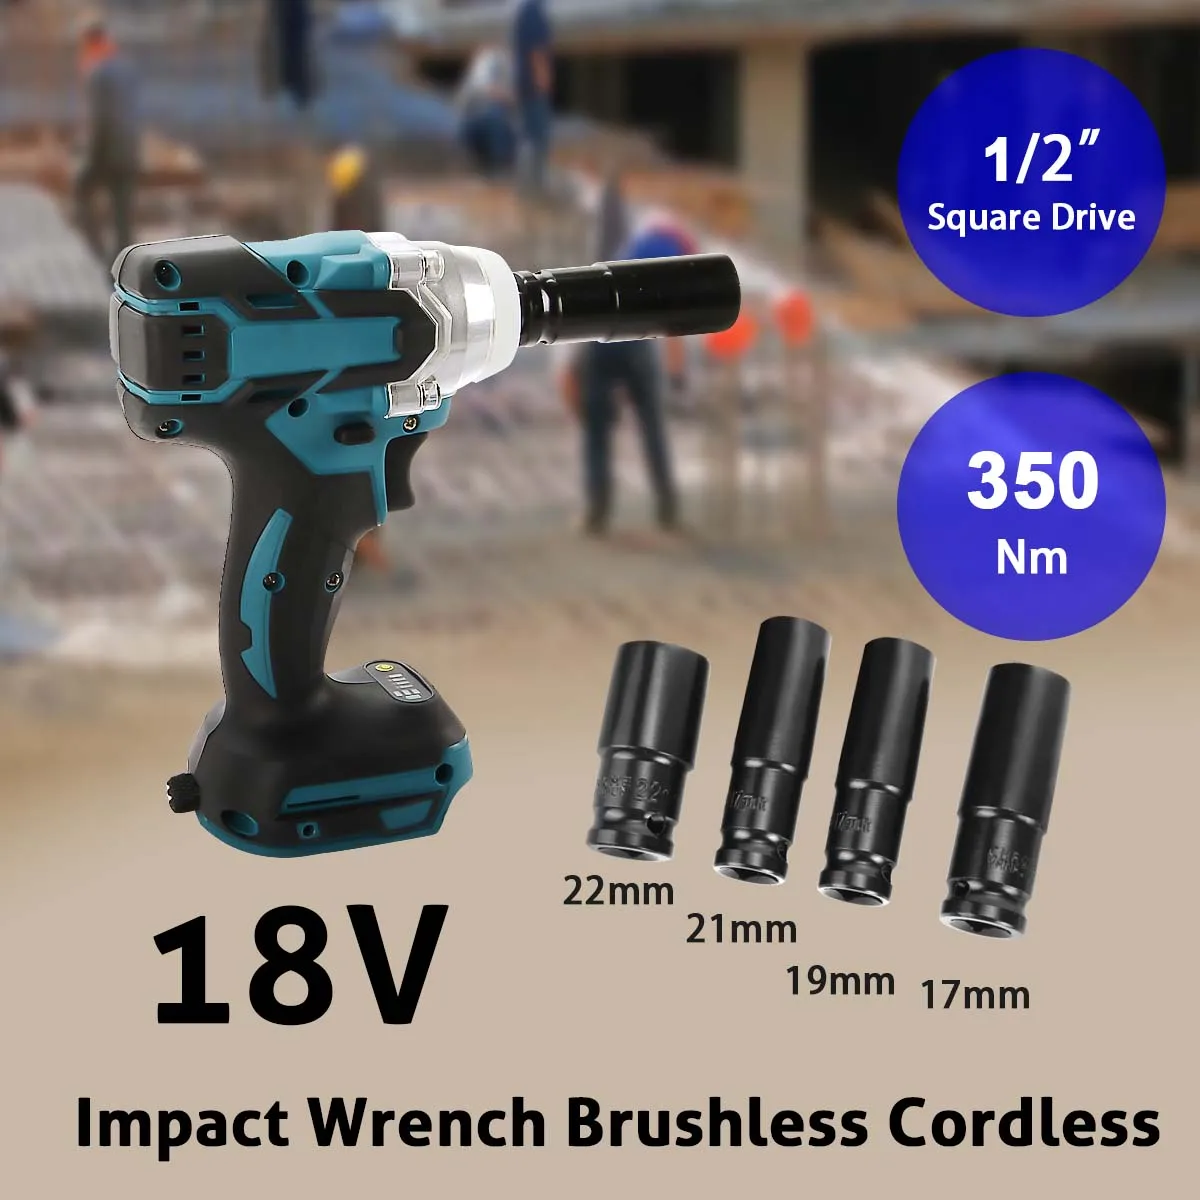 Brushless Impact Wrench 18V Electric Cordless Wrench 350N.m Torque 1/2 inch Socket Screwdriver Household Repair Power Tool